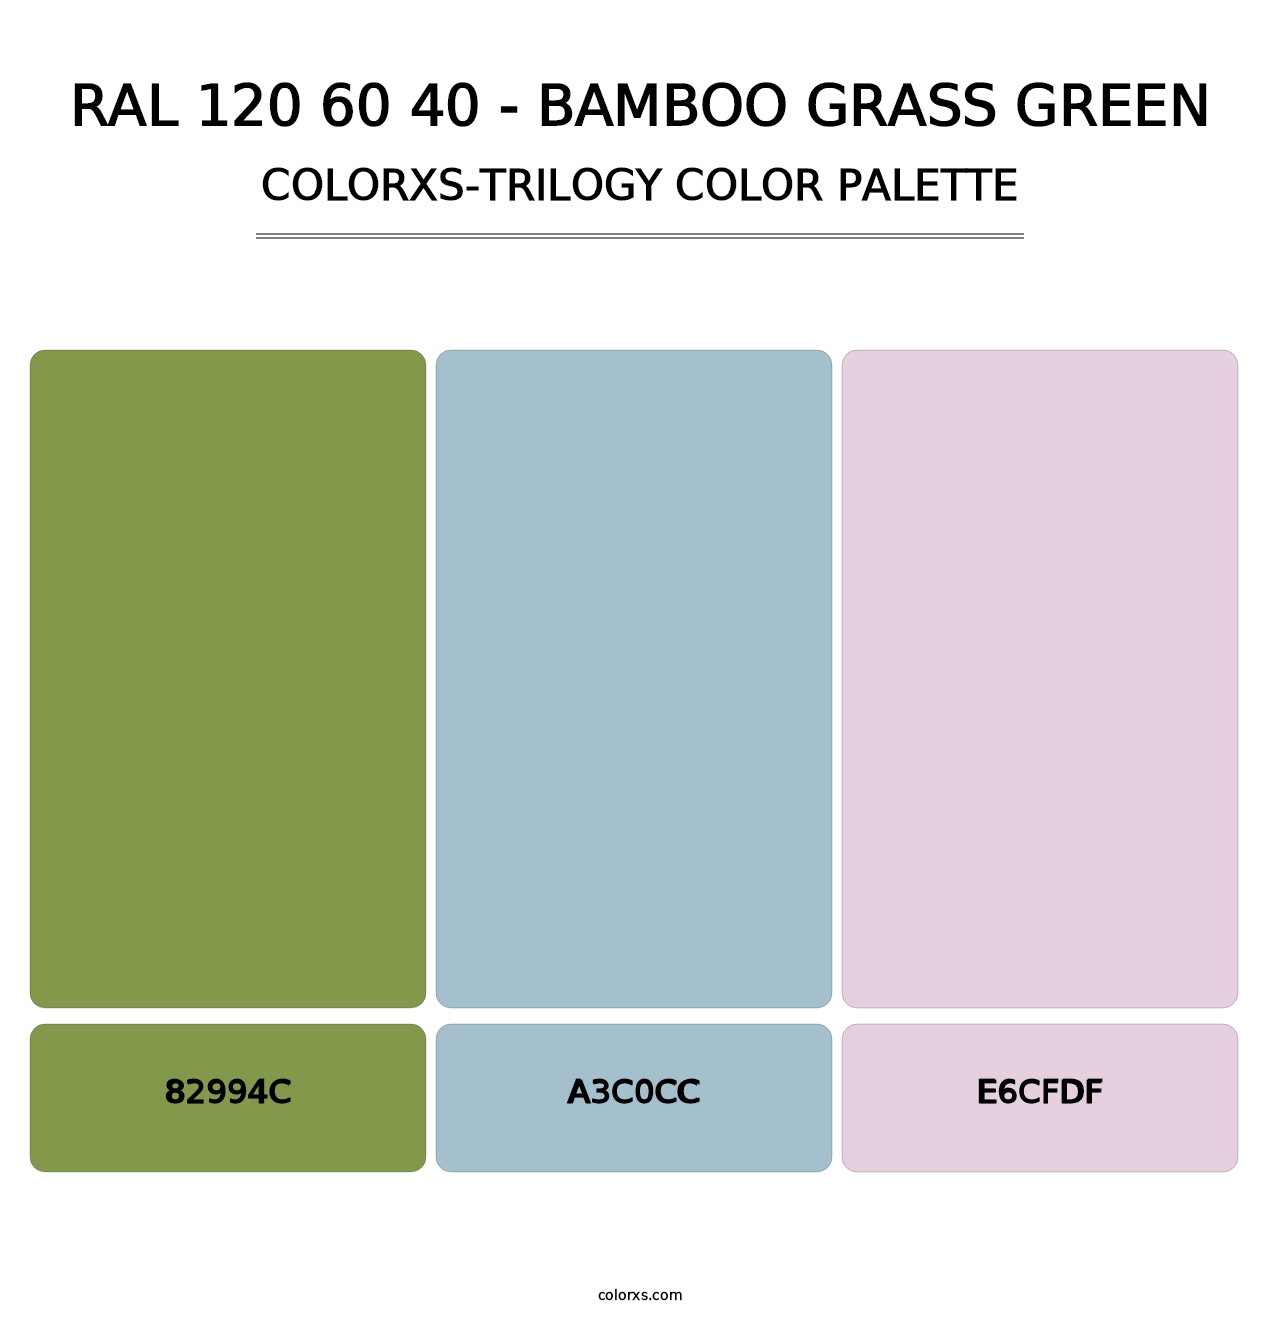 RAL 120 60 40 - Bamboo Grass Green - Colorxs Trilogy Palette